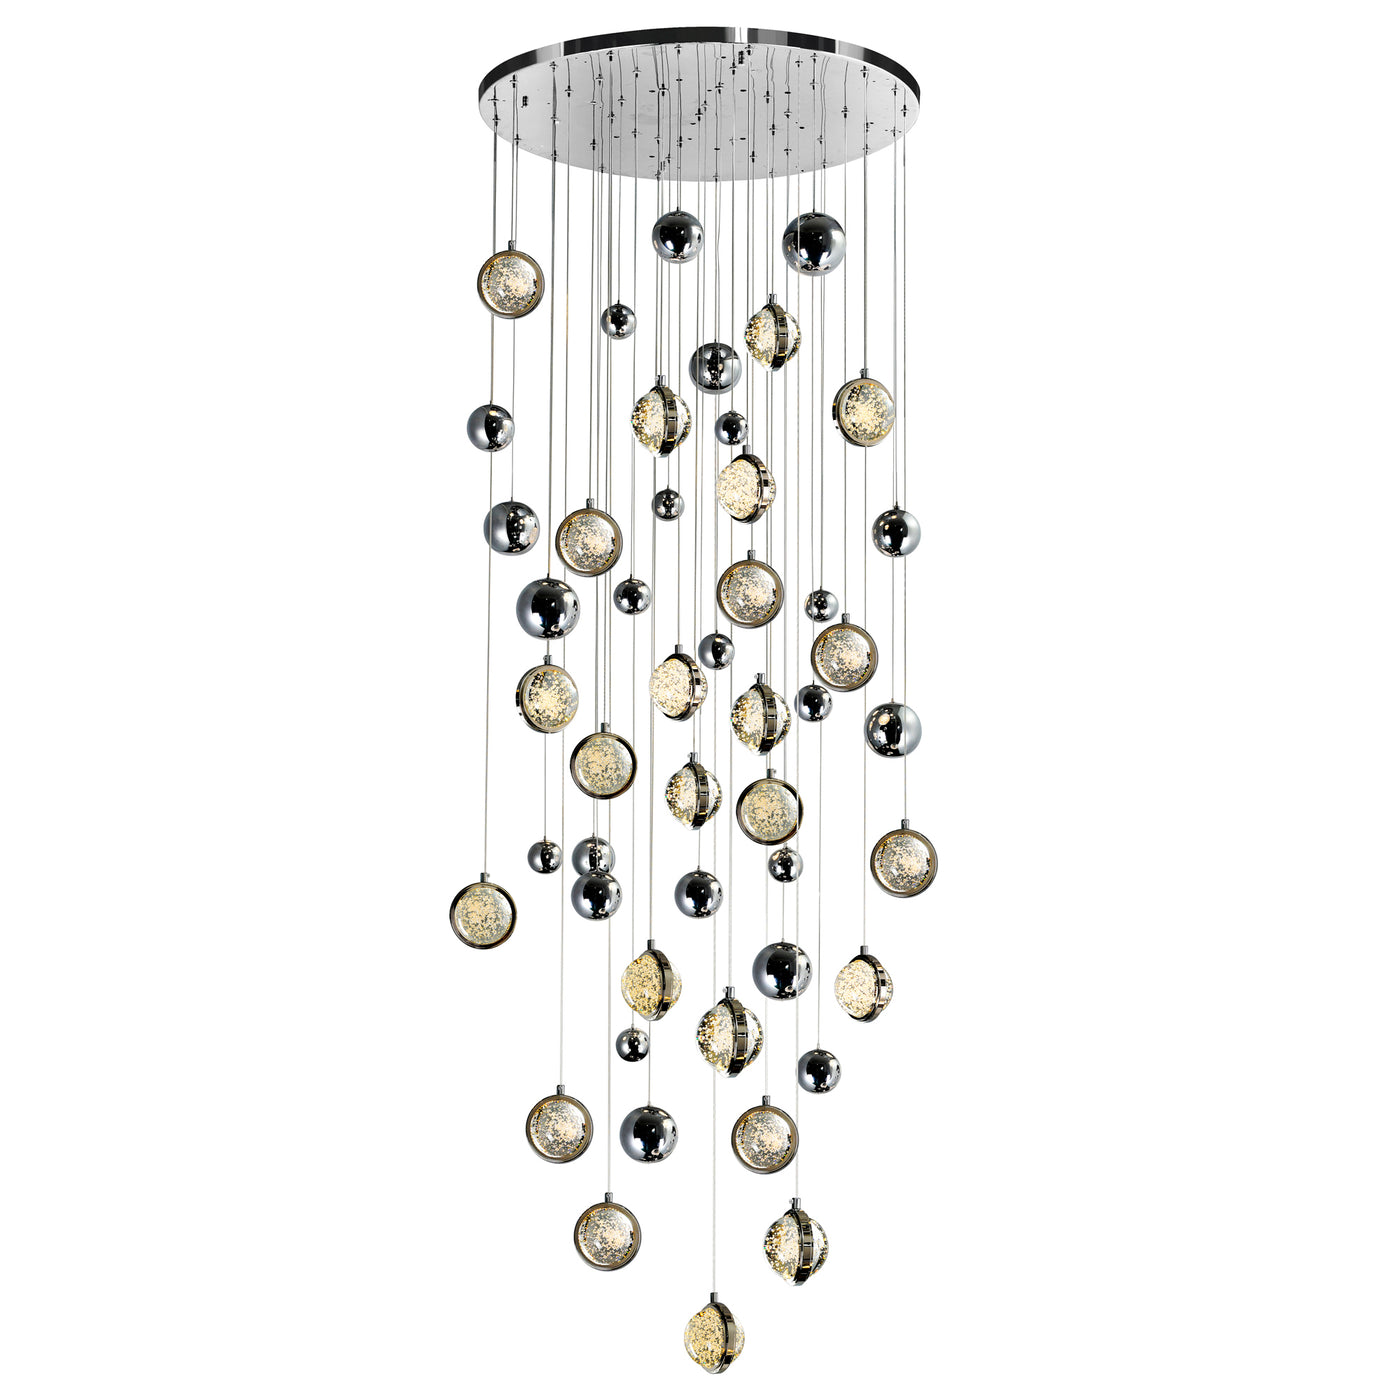 LED Polished Nickel Frame with Bubble Crystal and Chrome Globe Chandelier